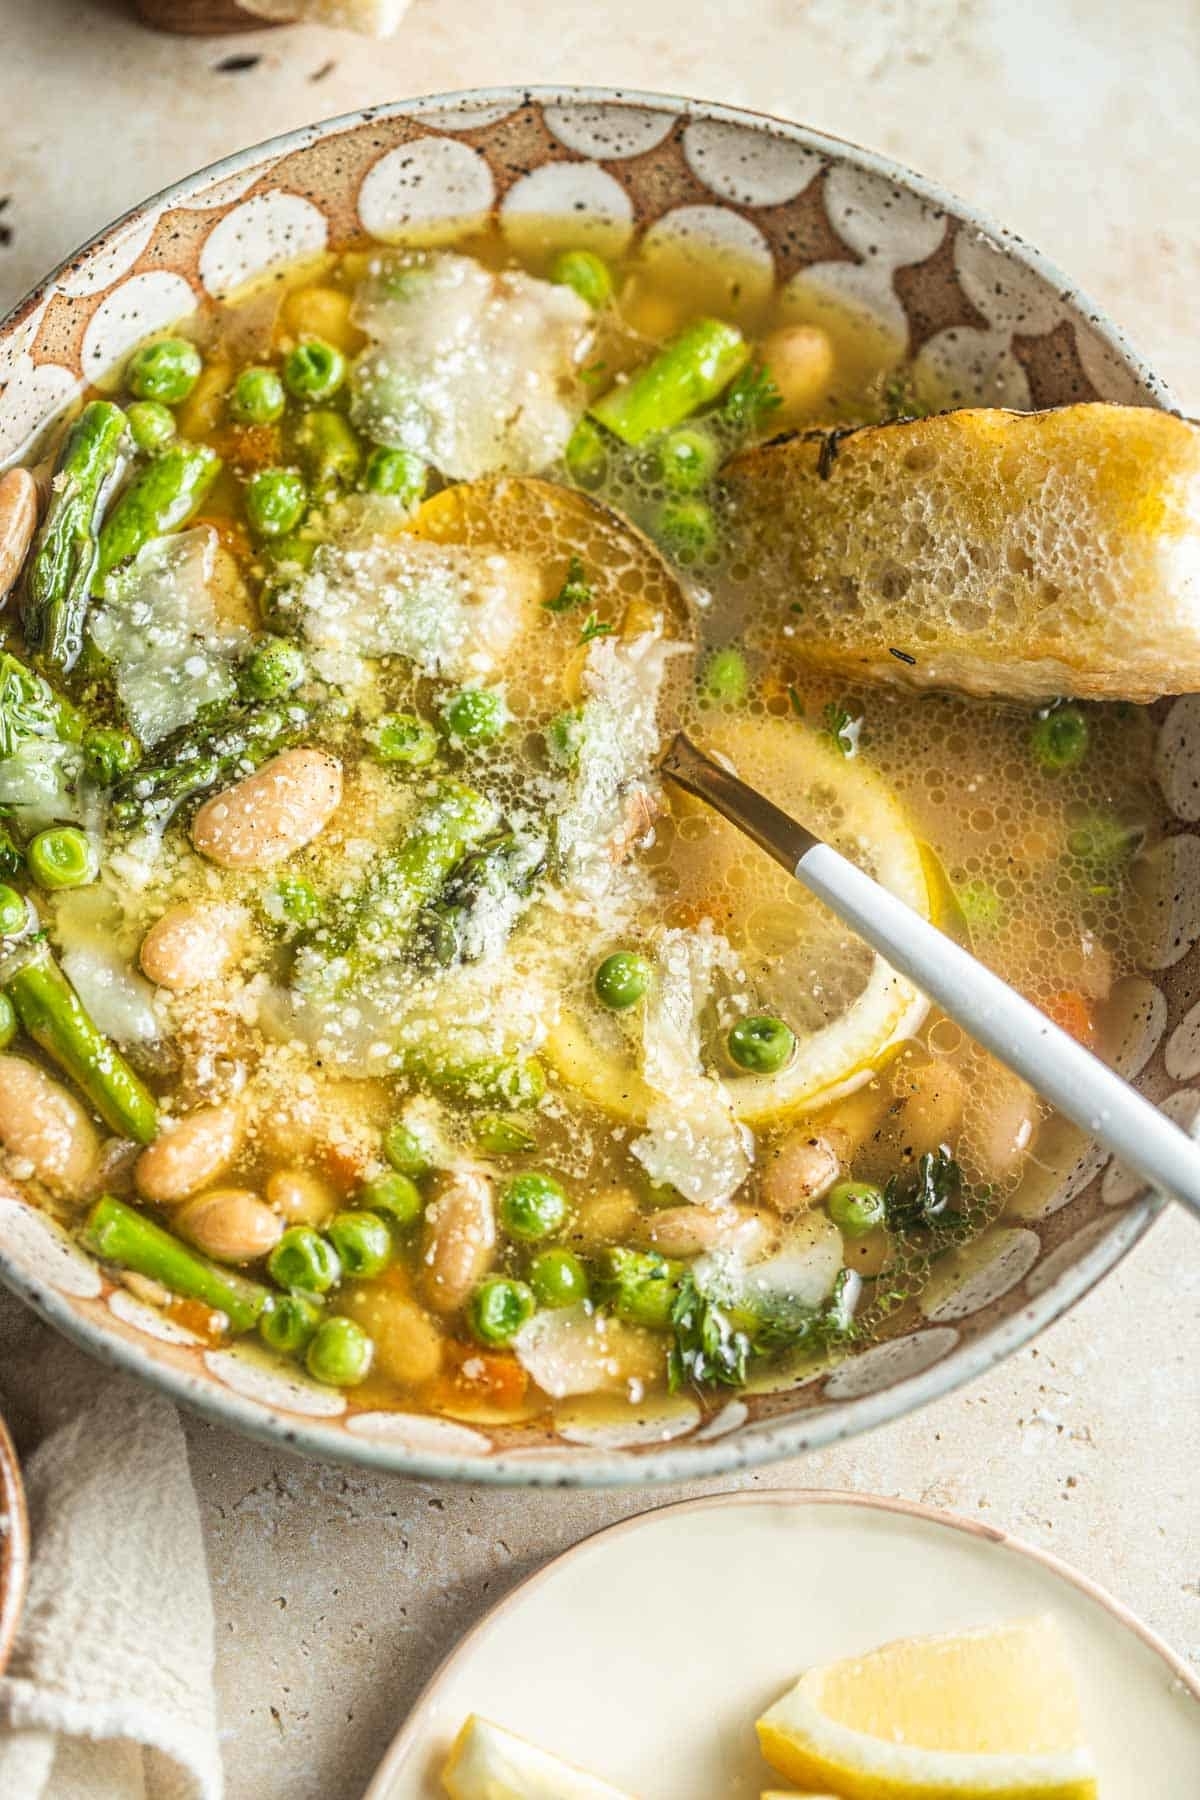 Bowl of soup with beans, peas, asparagus, lemon slices, and topped with grated cheese